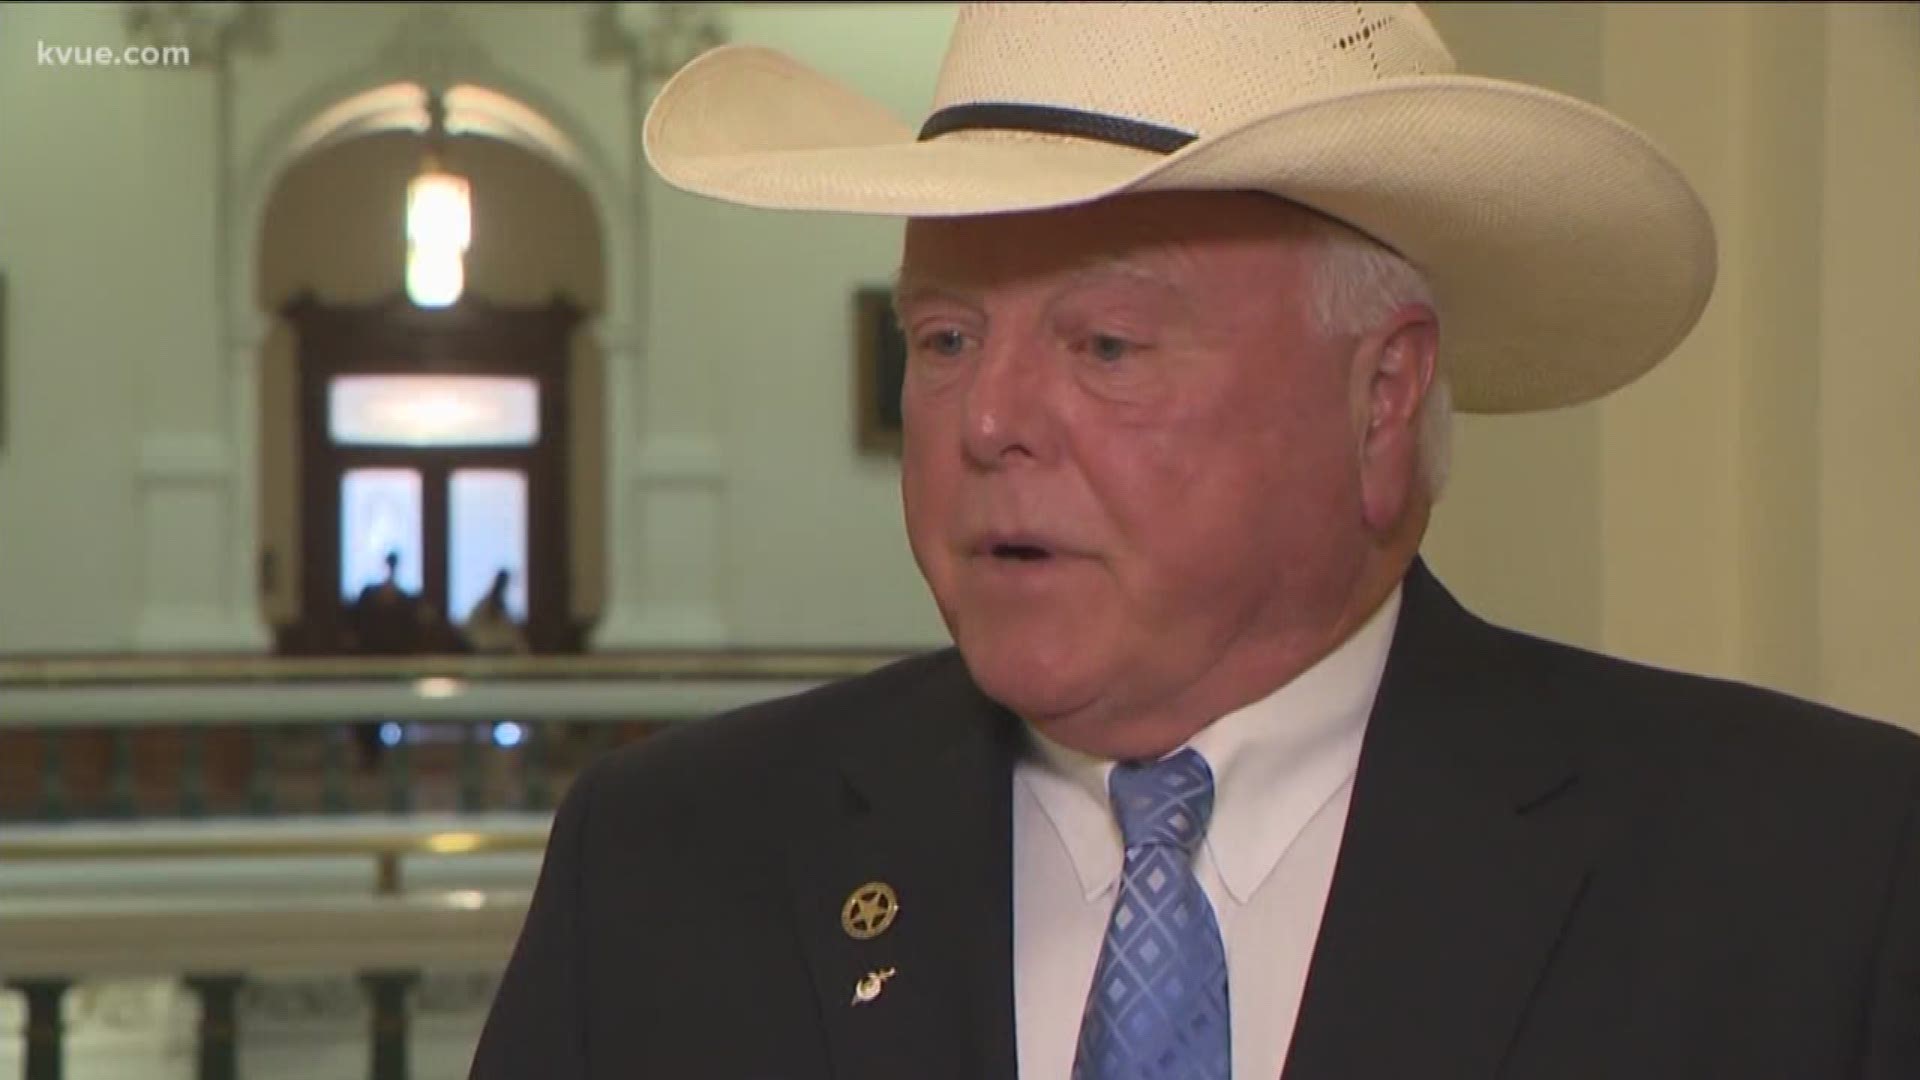 Texas Agriculture Commissioner Sid Miller is facing backlash for recently posting a Facebook comment that many are calling offensive.